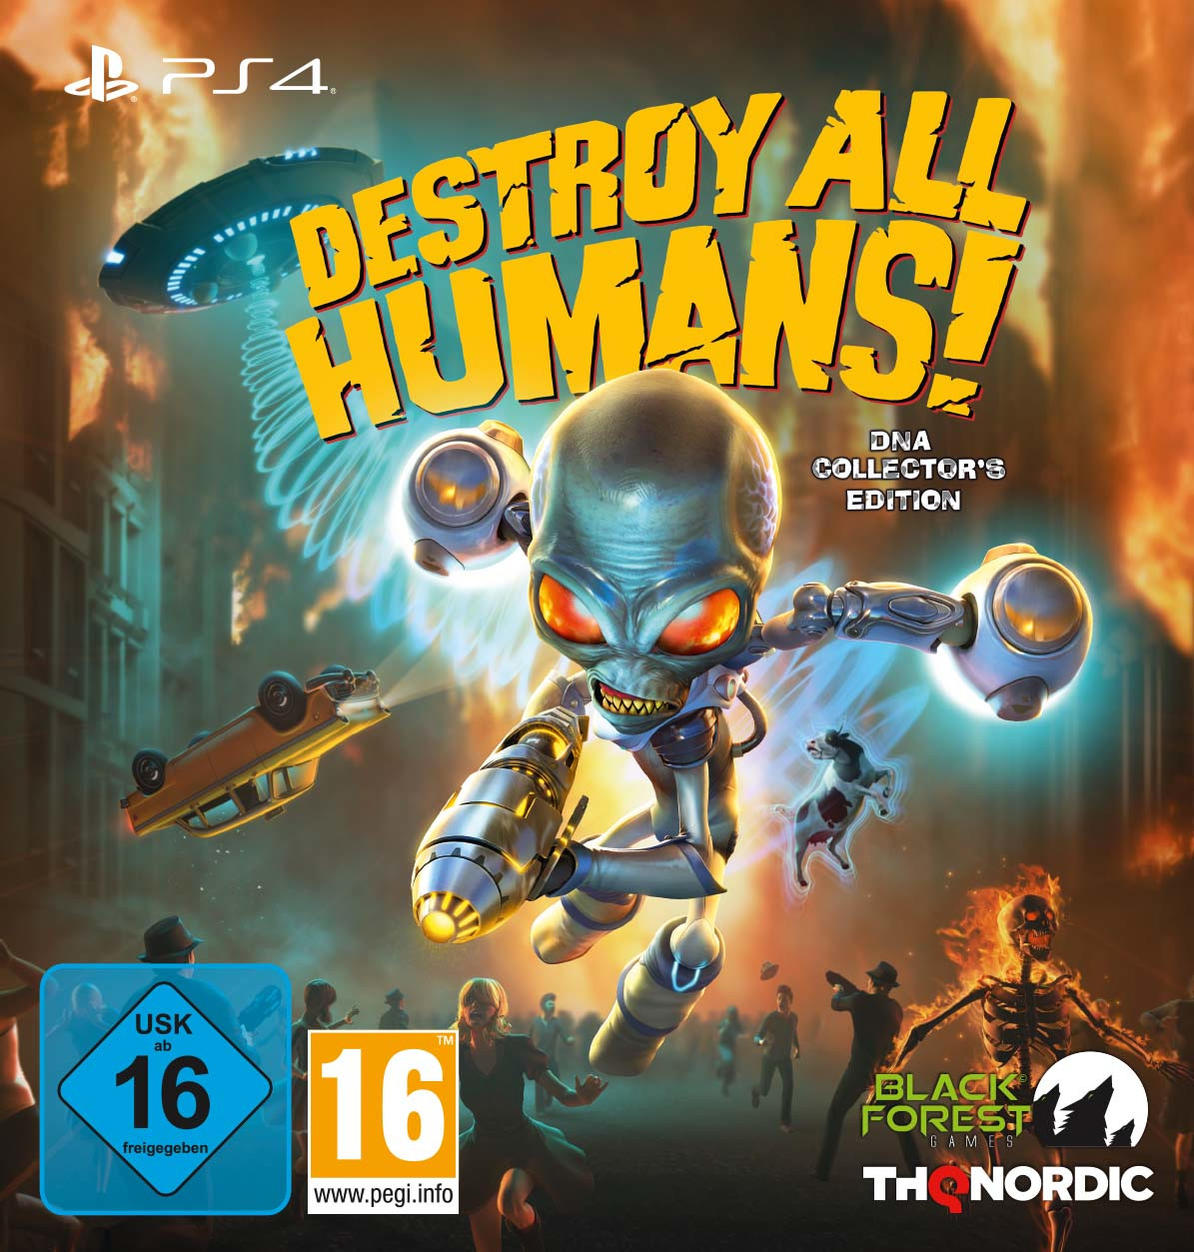 Edition Destroy Collectors DNA [PlayStation - 4] Humans! All